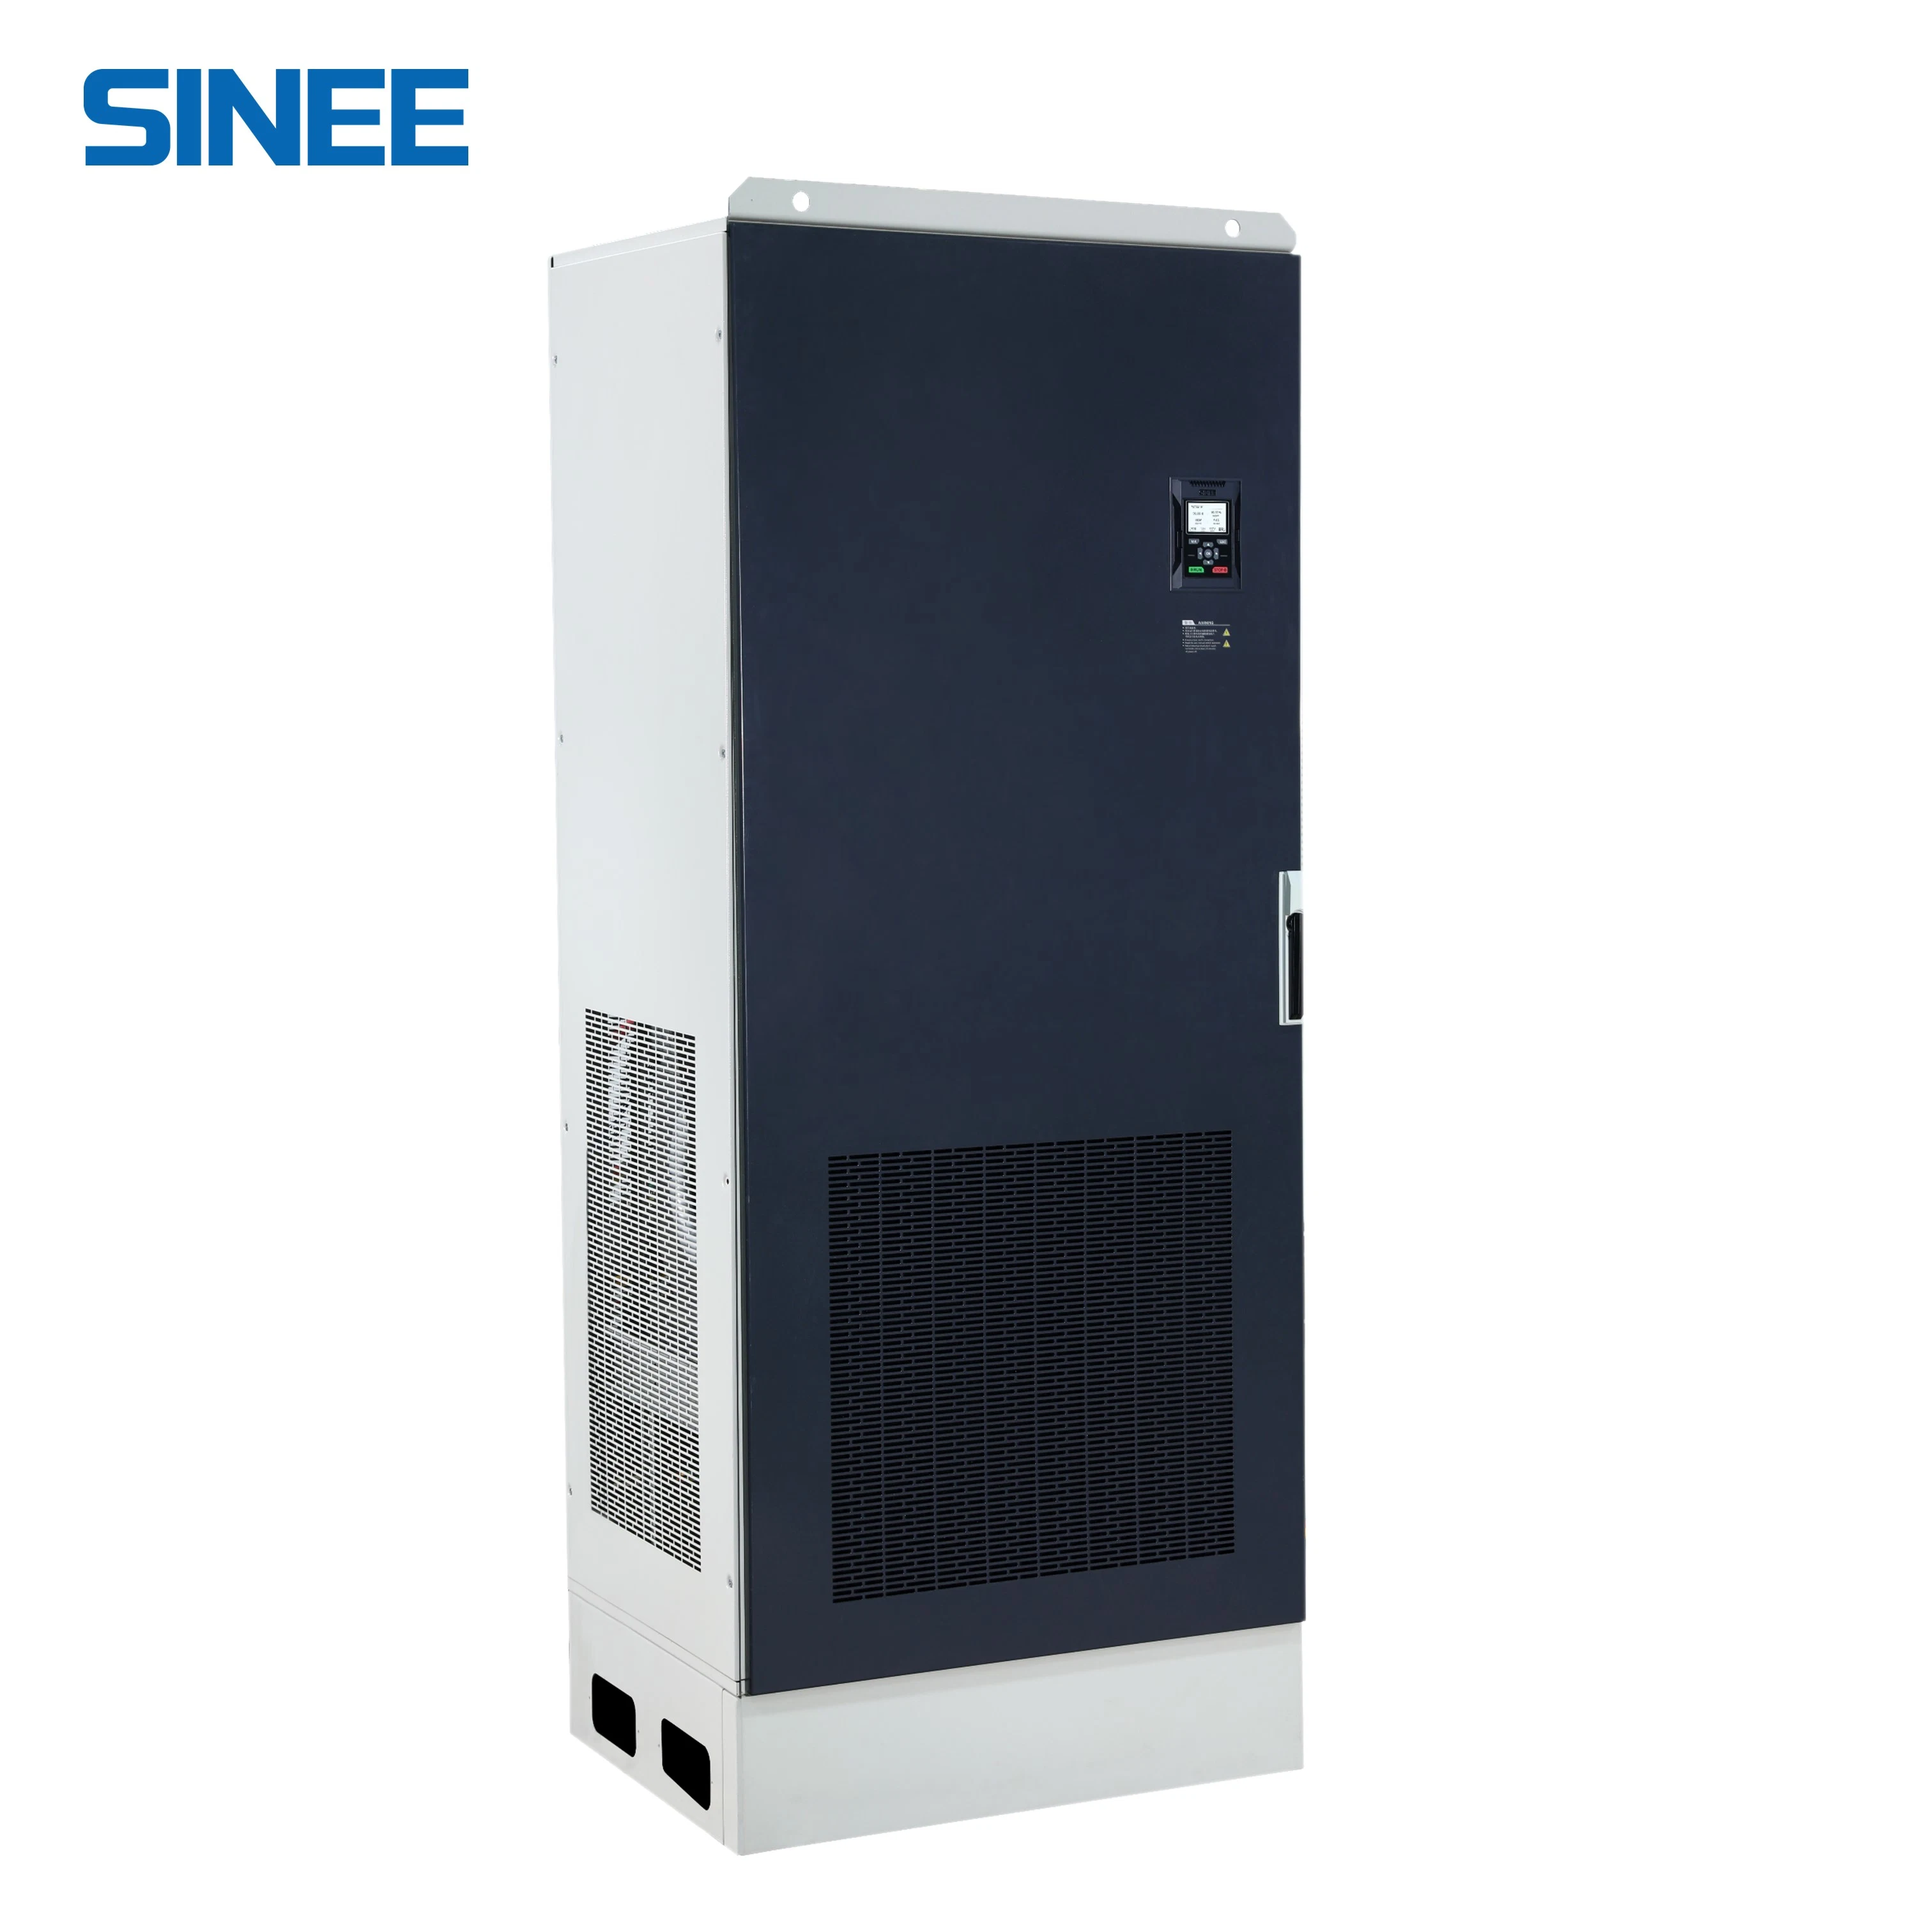 2.2kw 5.5kw 7.5kw 11kw 15kw 22kw 220V 380V AC 50Hz to 60Hz Variable Speed Controller Drive VFD Frequency Converters Inverter